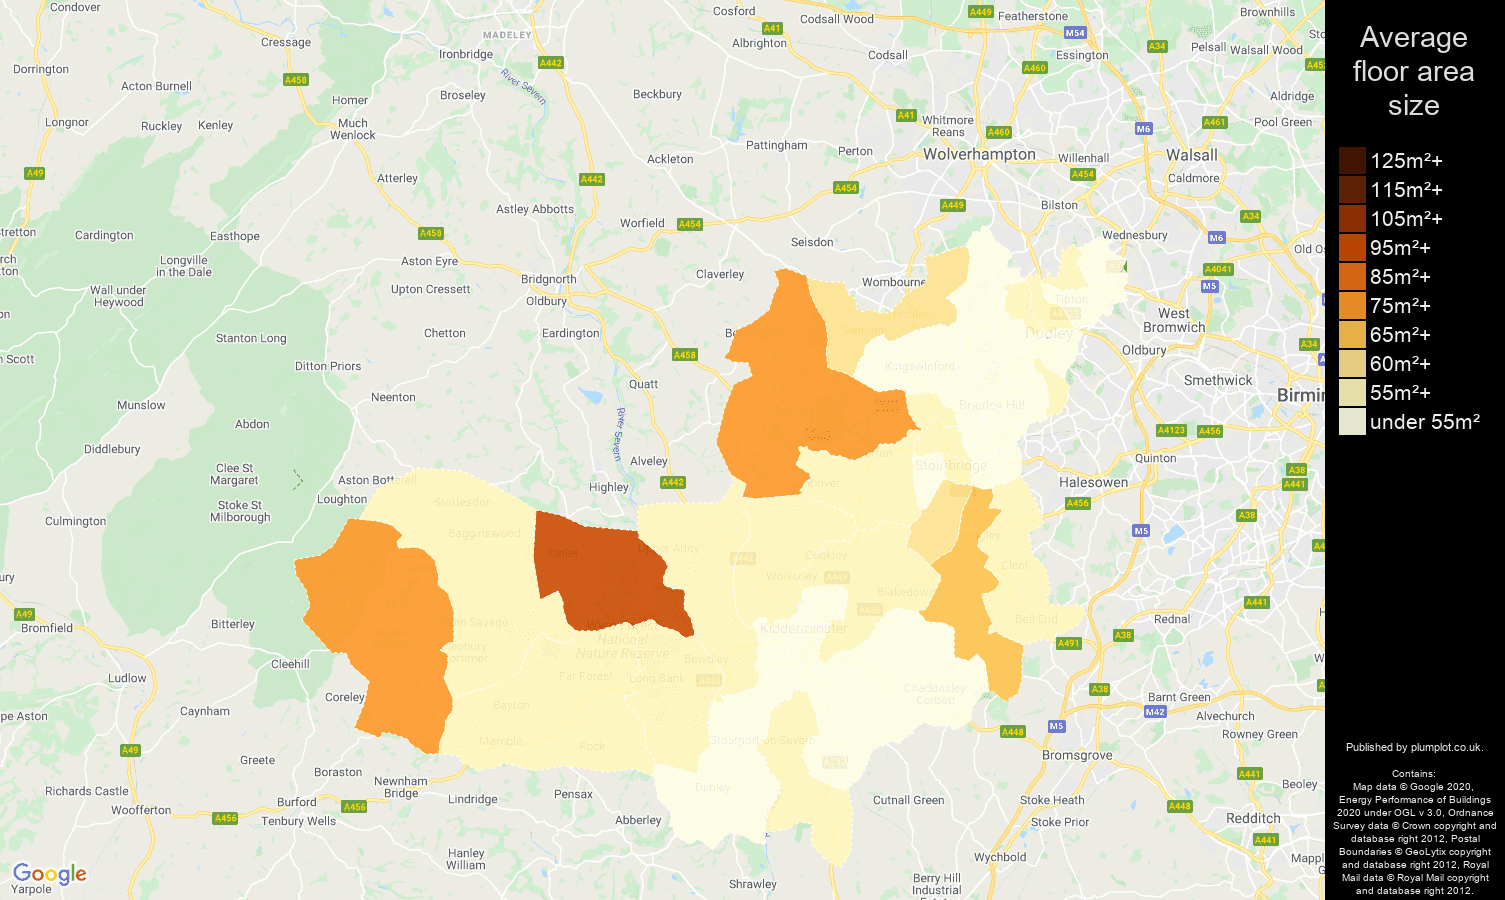 Dudley map of average floor area size of flats